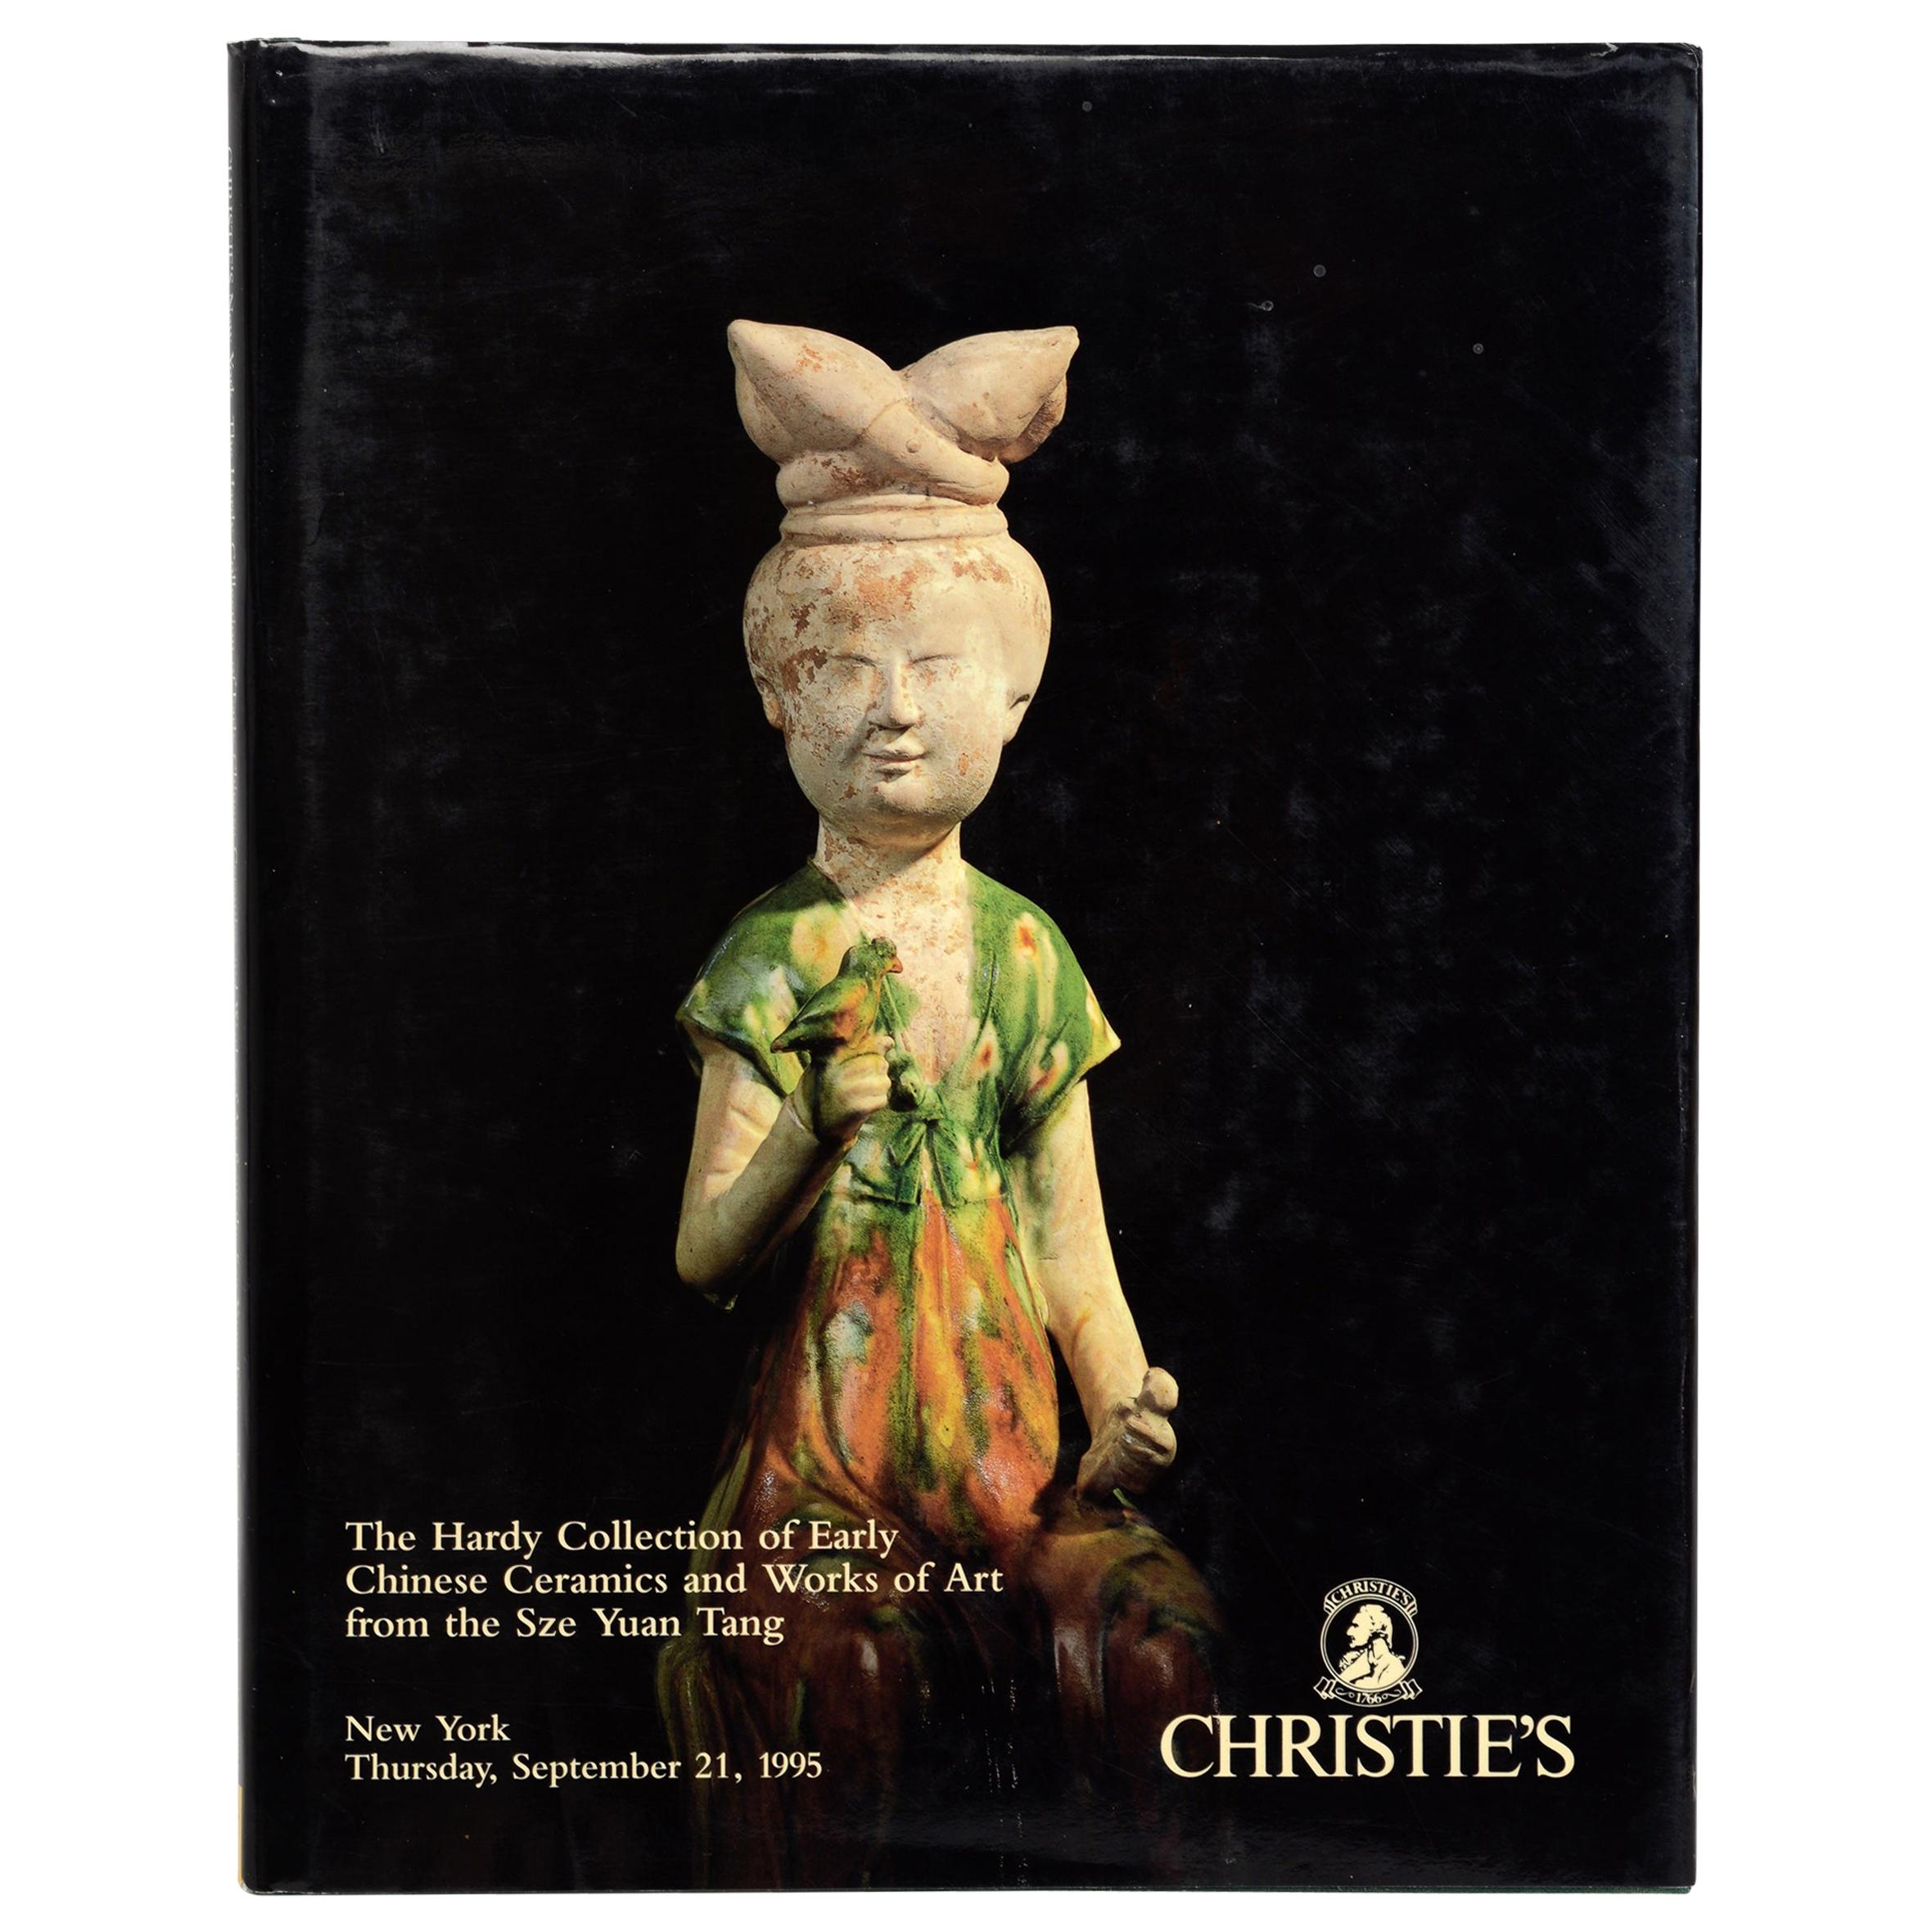 Christie's, The Hardy Collection of Early Chinese Ceramics & Works of Art, 1995